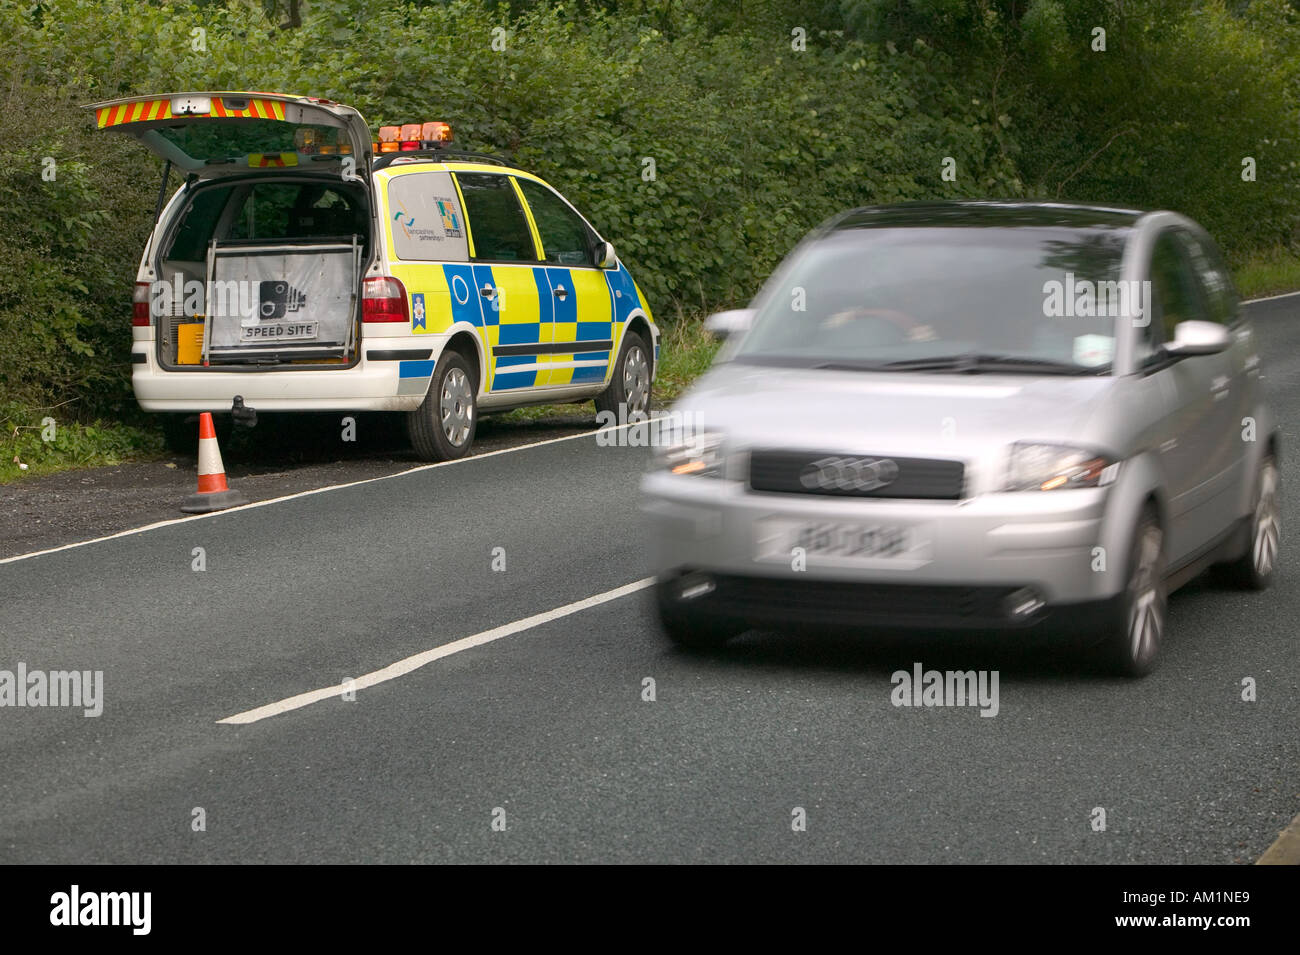 police car checking motorists speed with a mobile speed camera unit Stock  Photo - Alamy